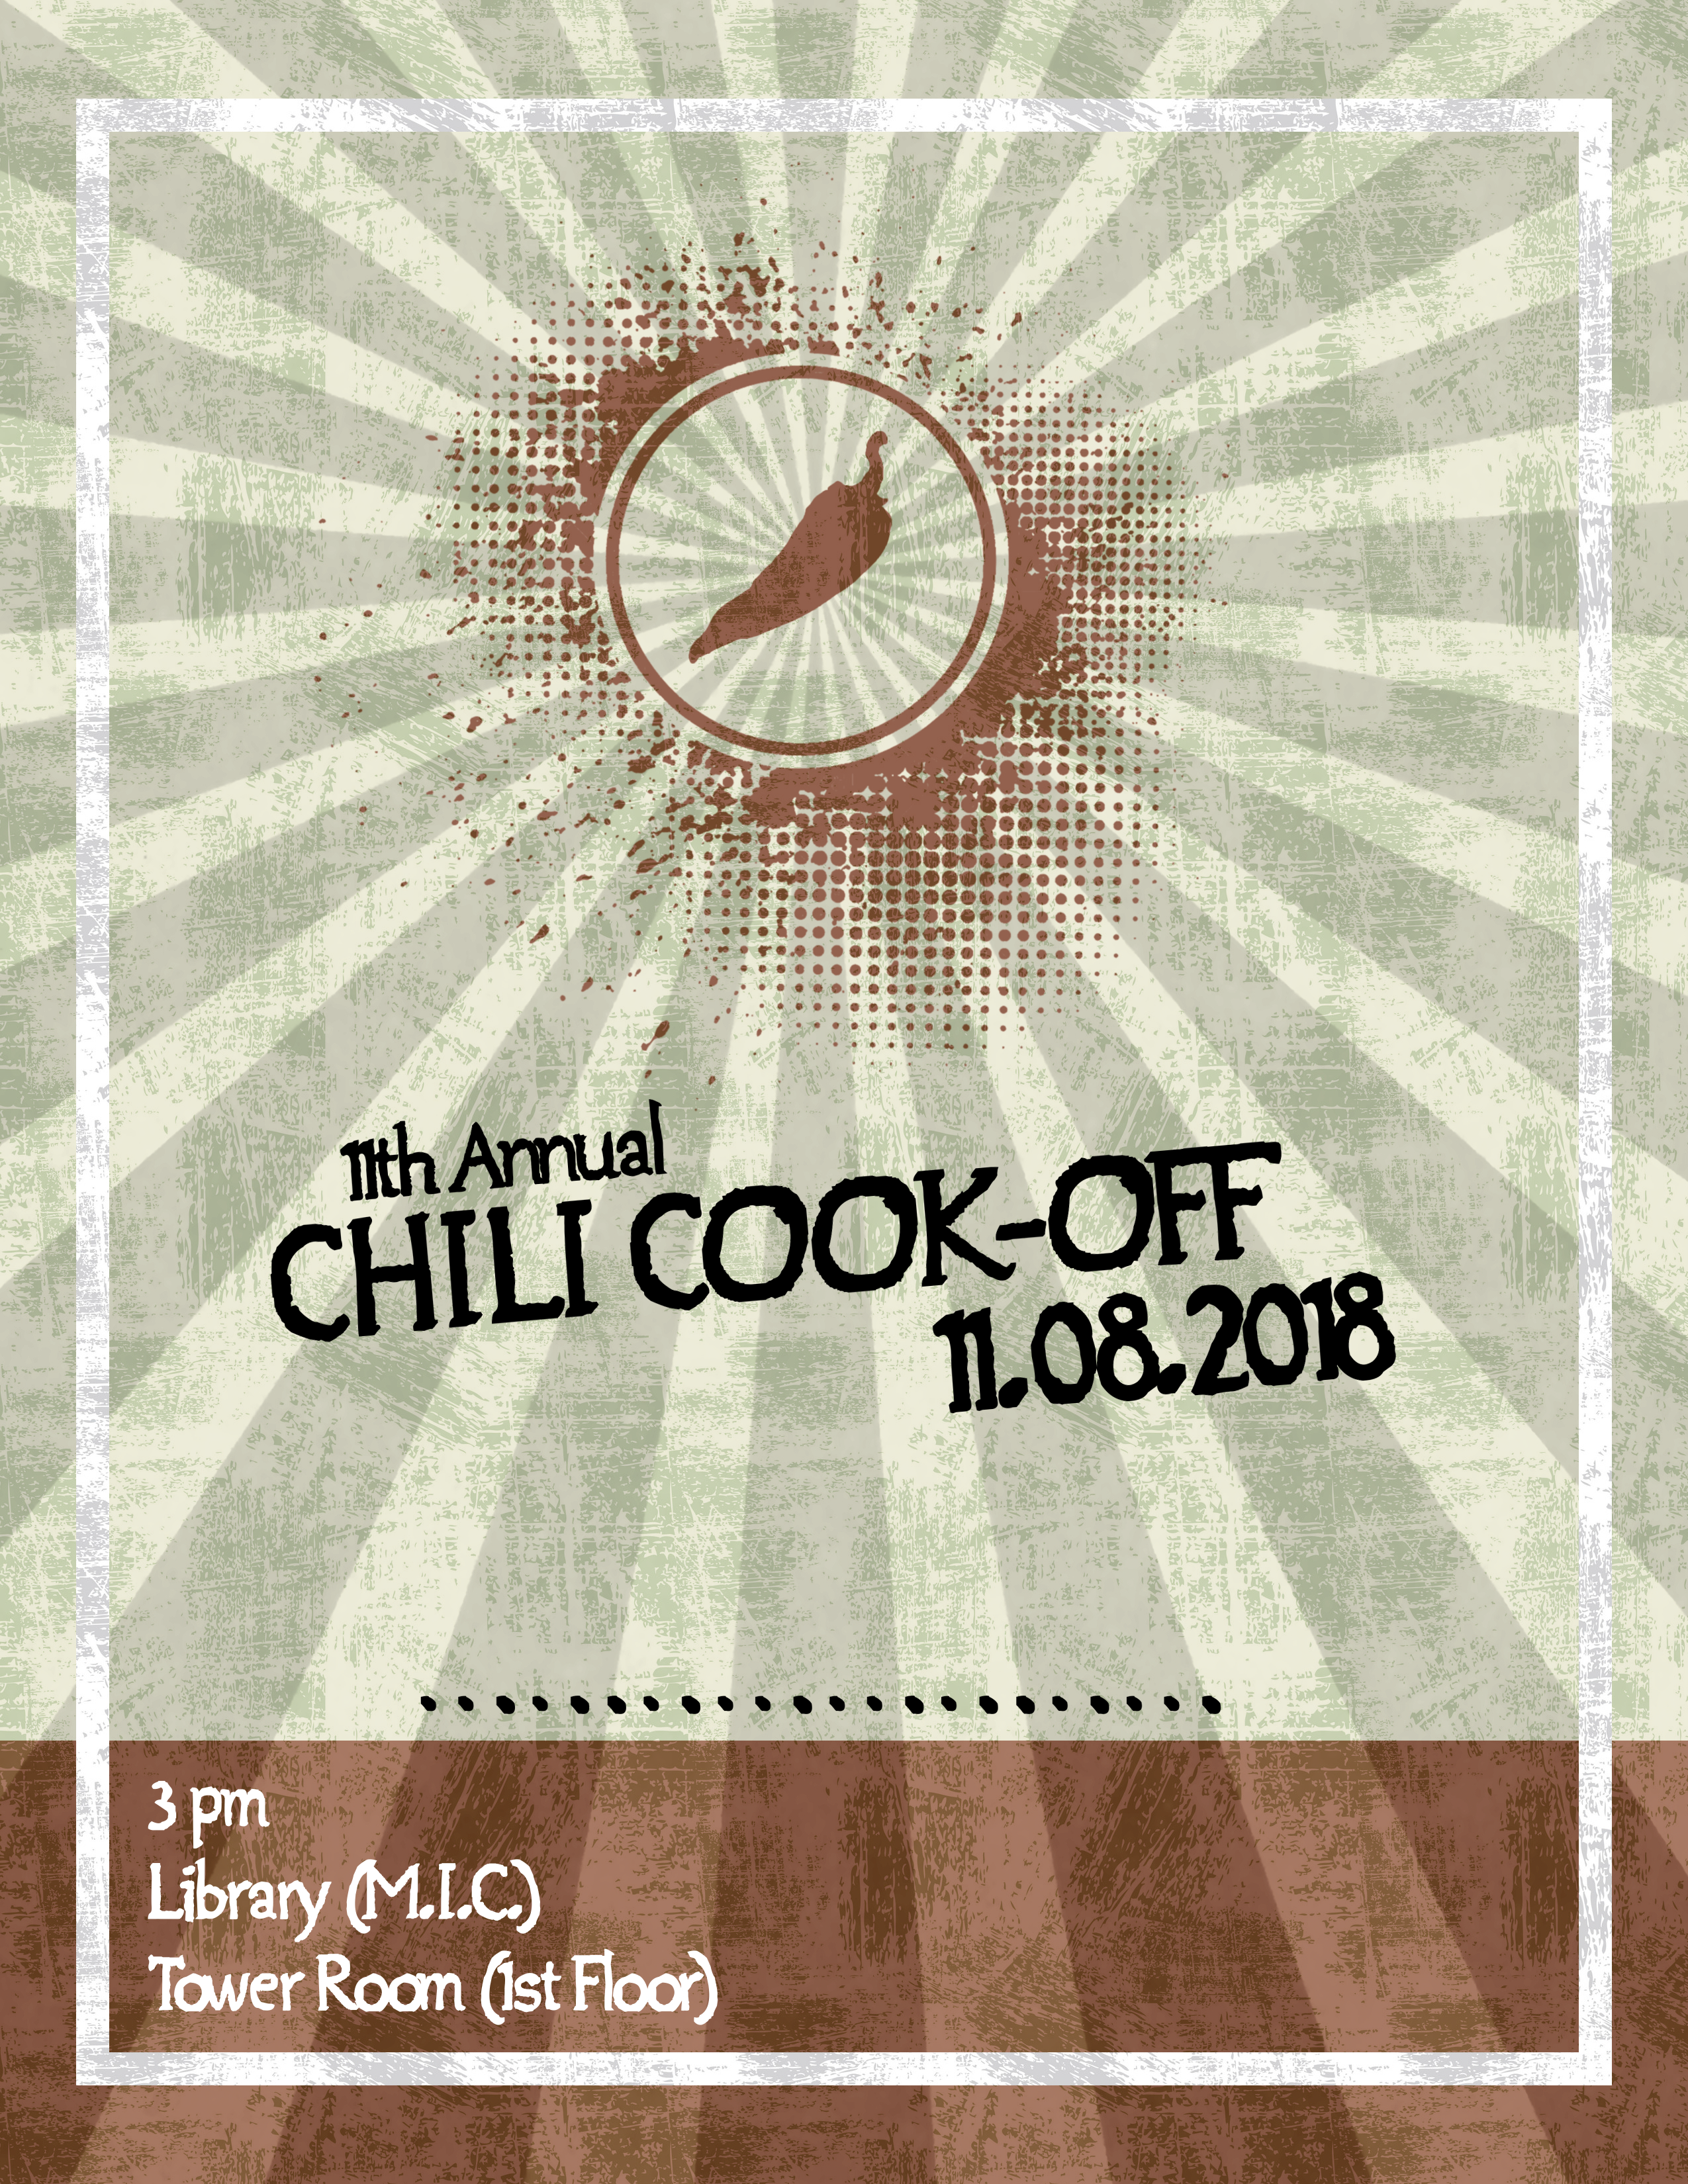 11th Annual Chili Cook-off, 11-08-2018. 3pm, Library (M.I.C.), Tower Room (1st Floor).